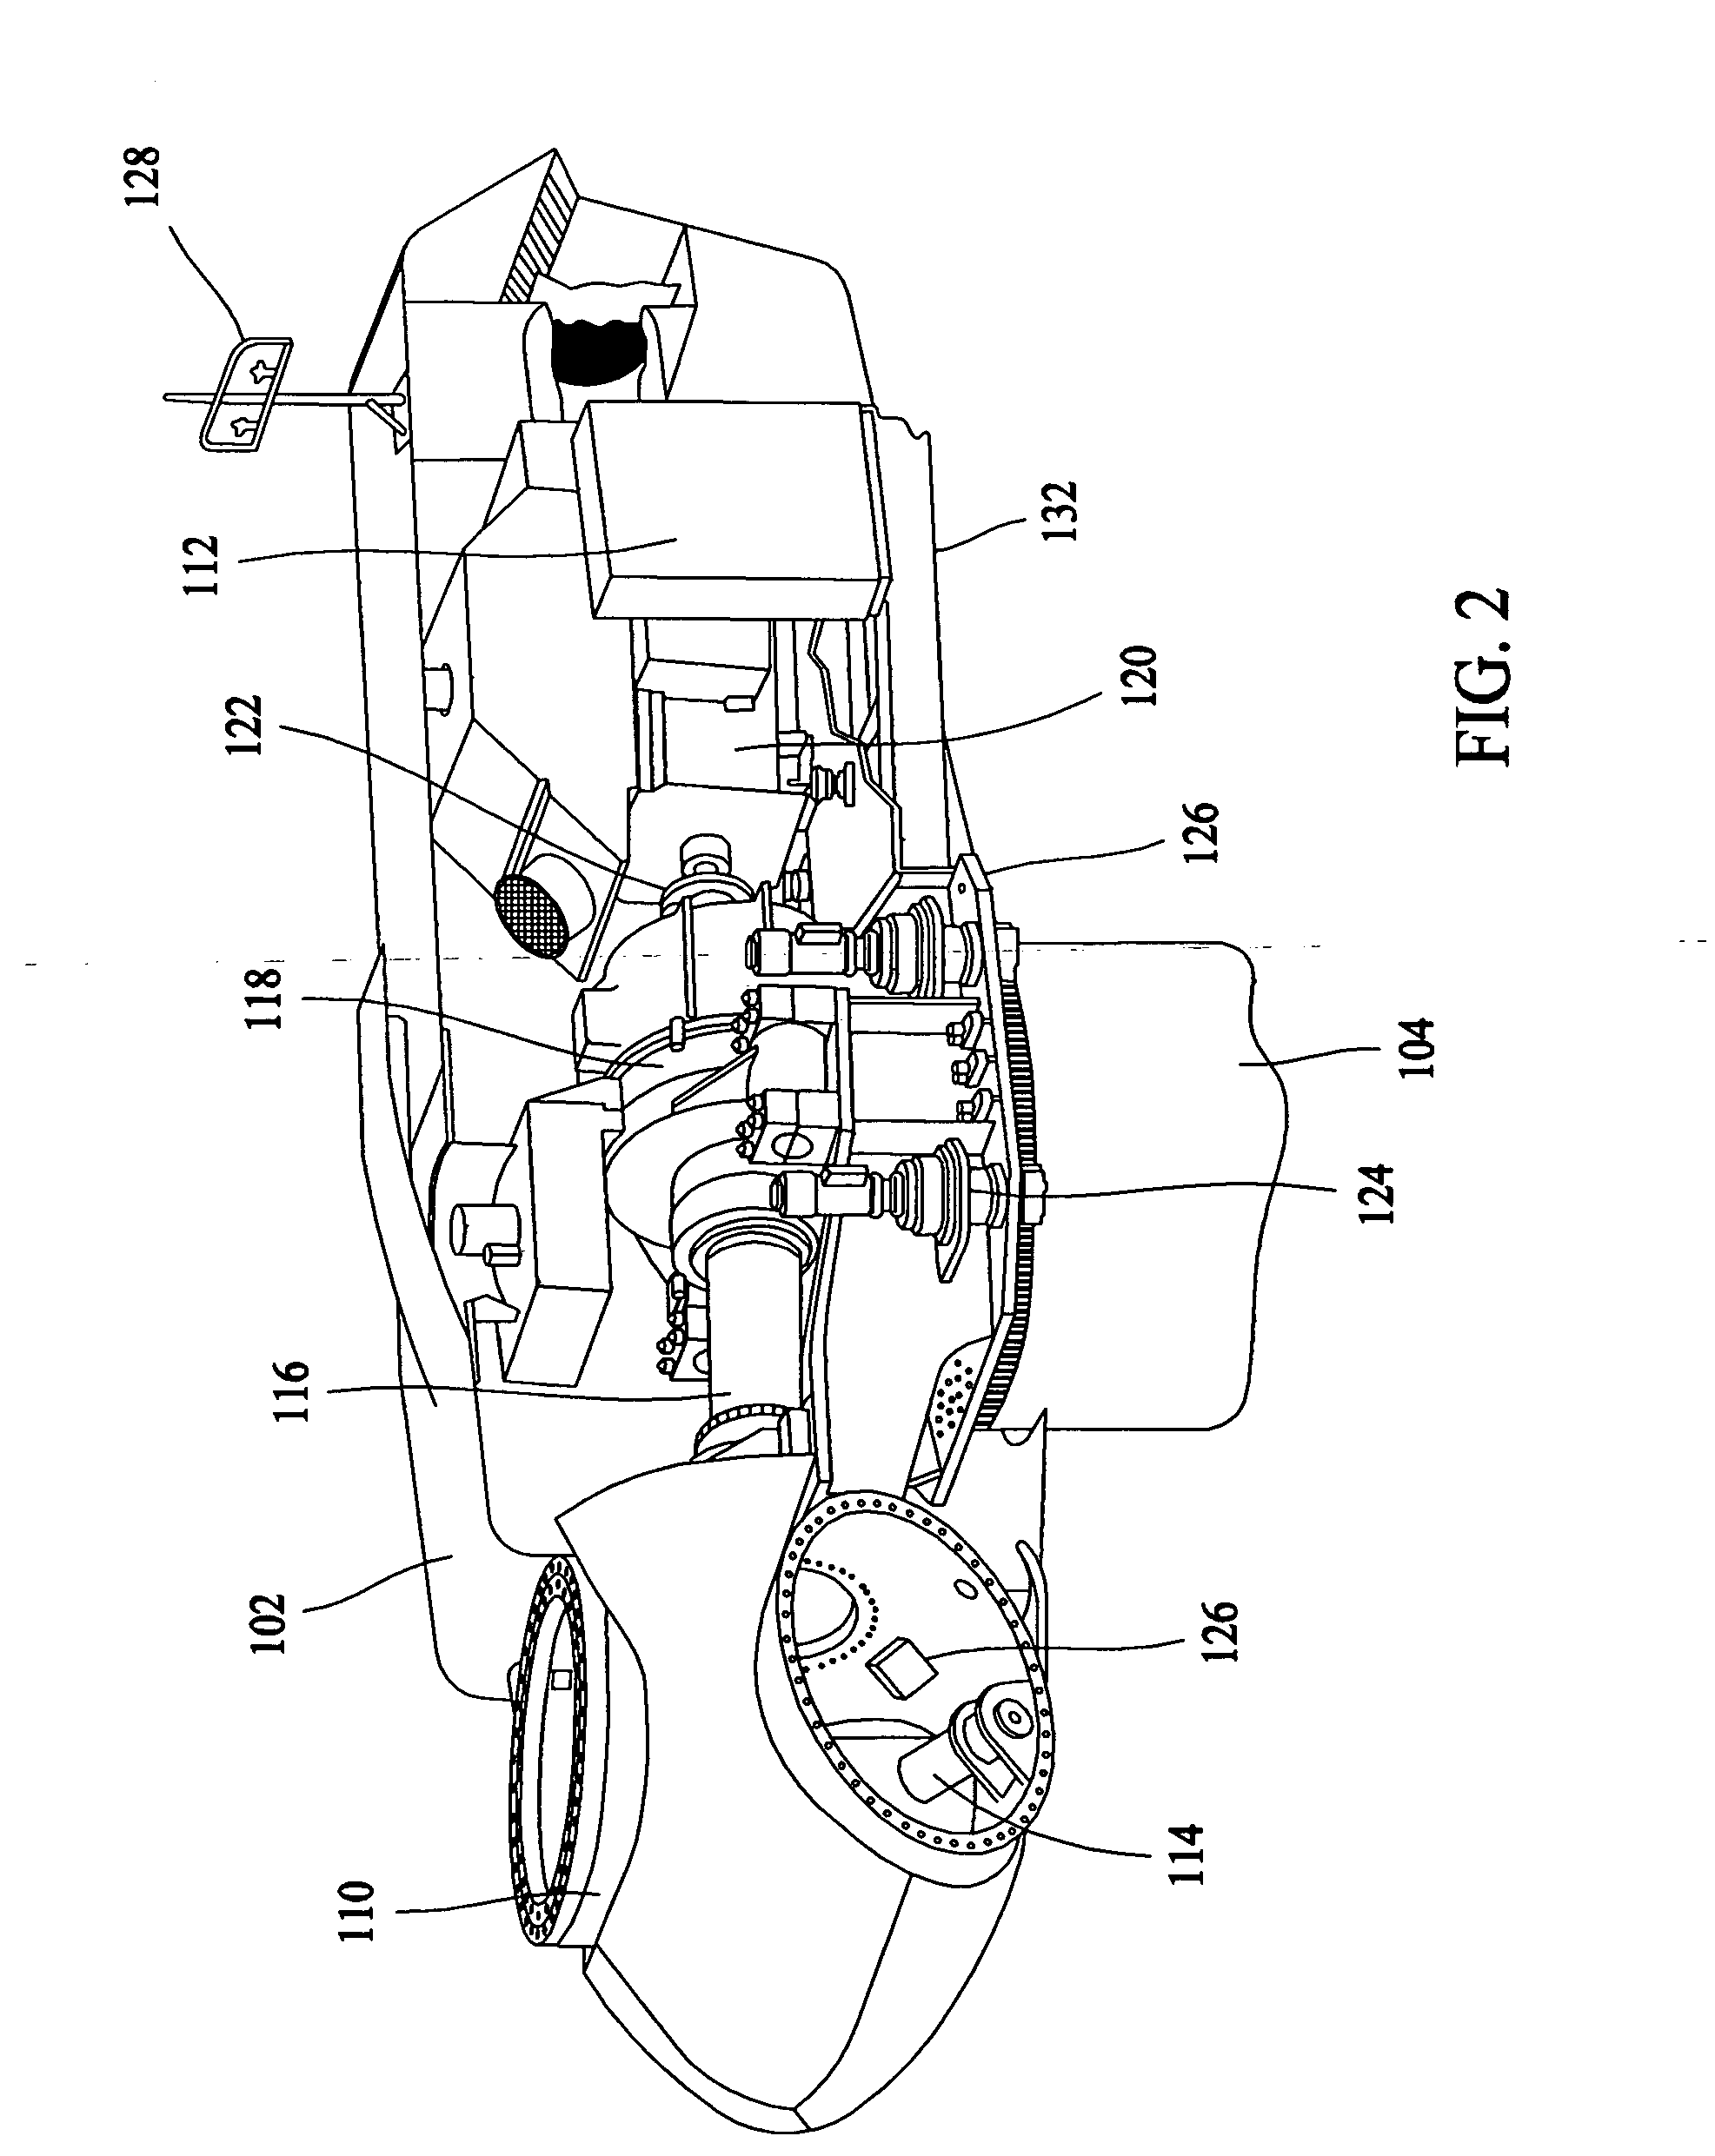 Methods and apparatus for pitch control power conversion